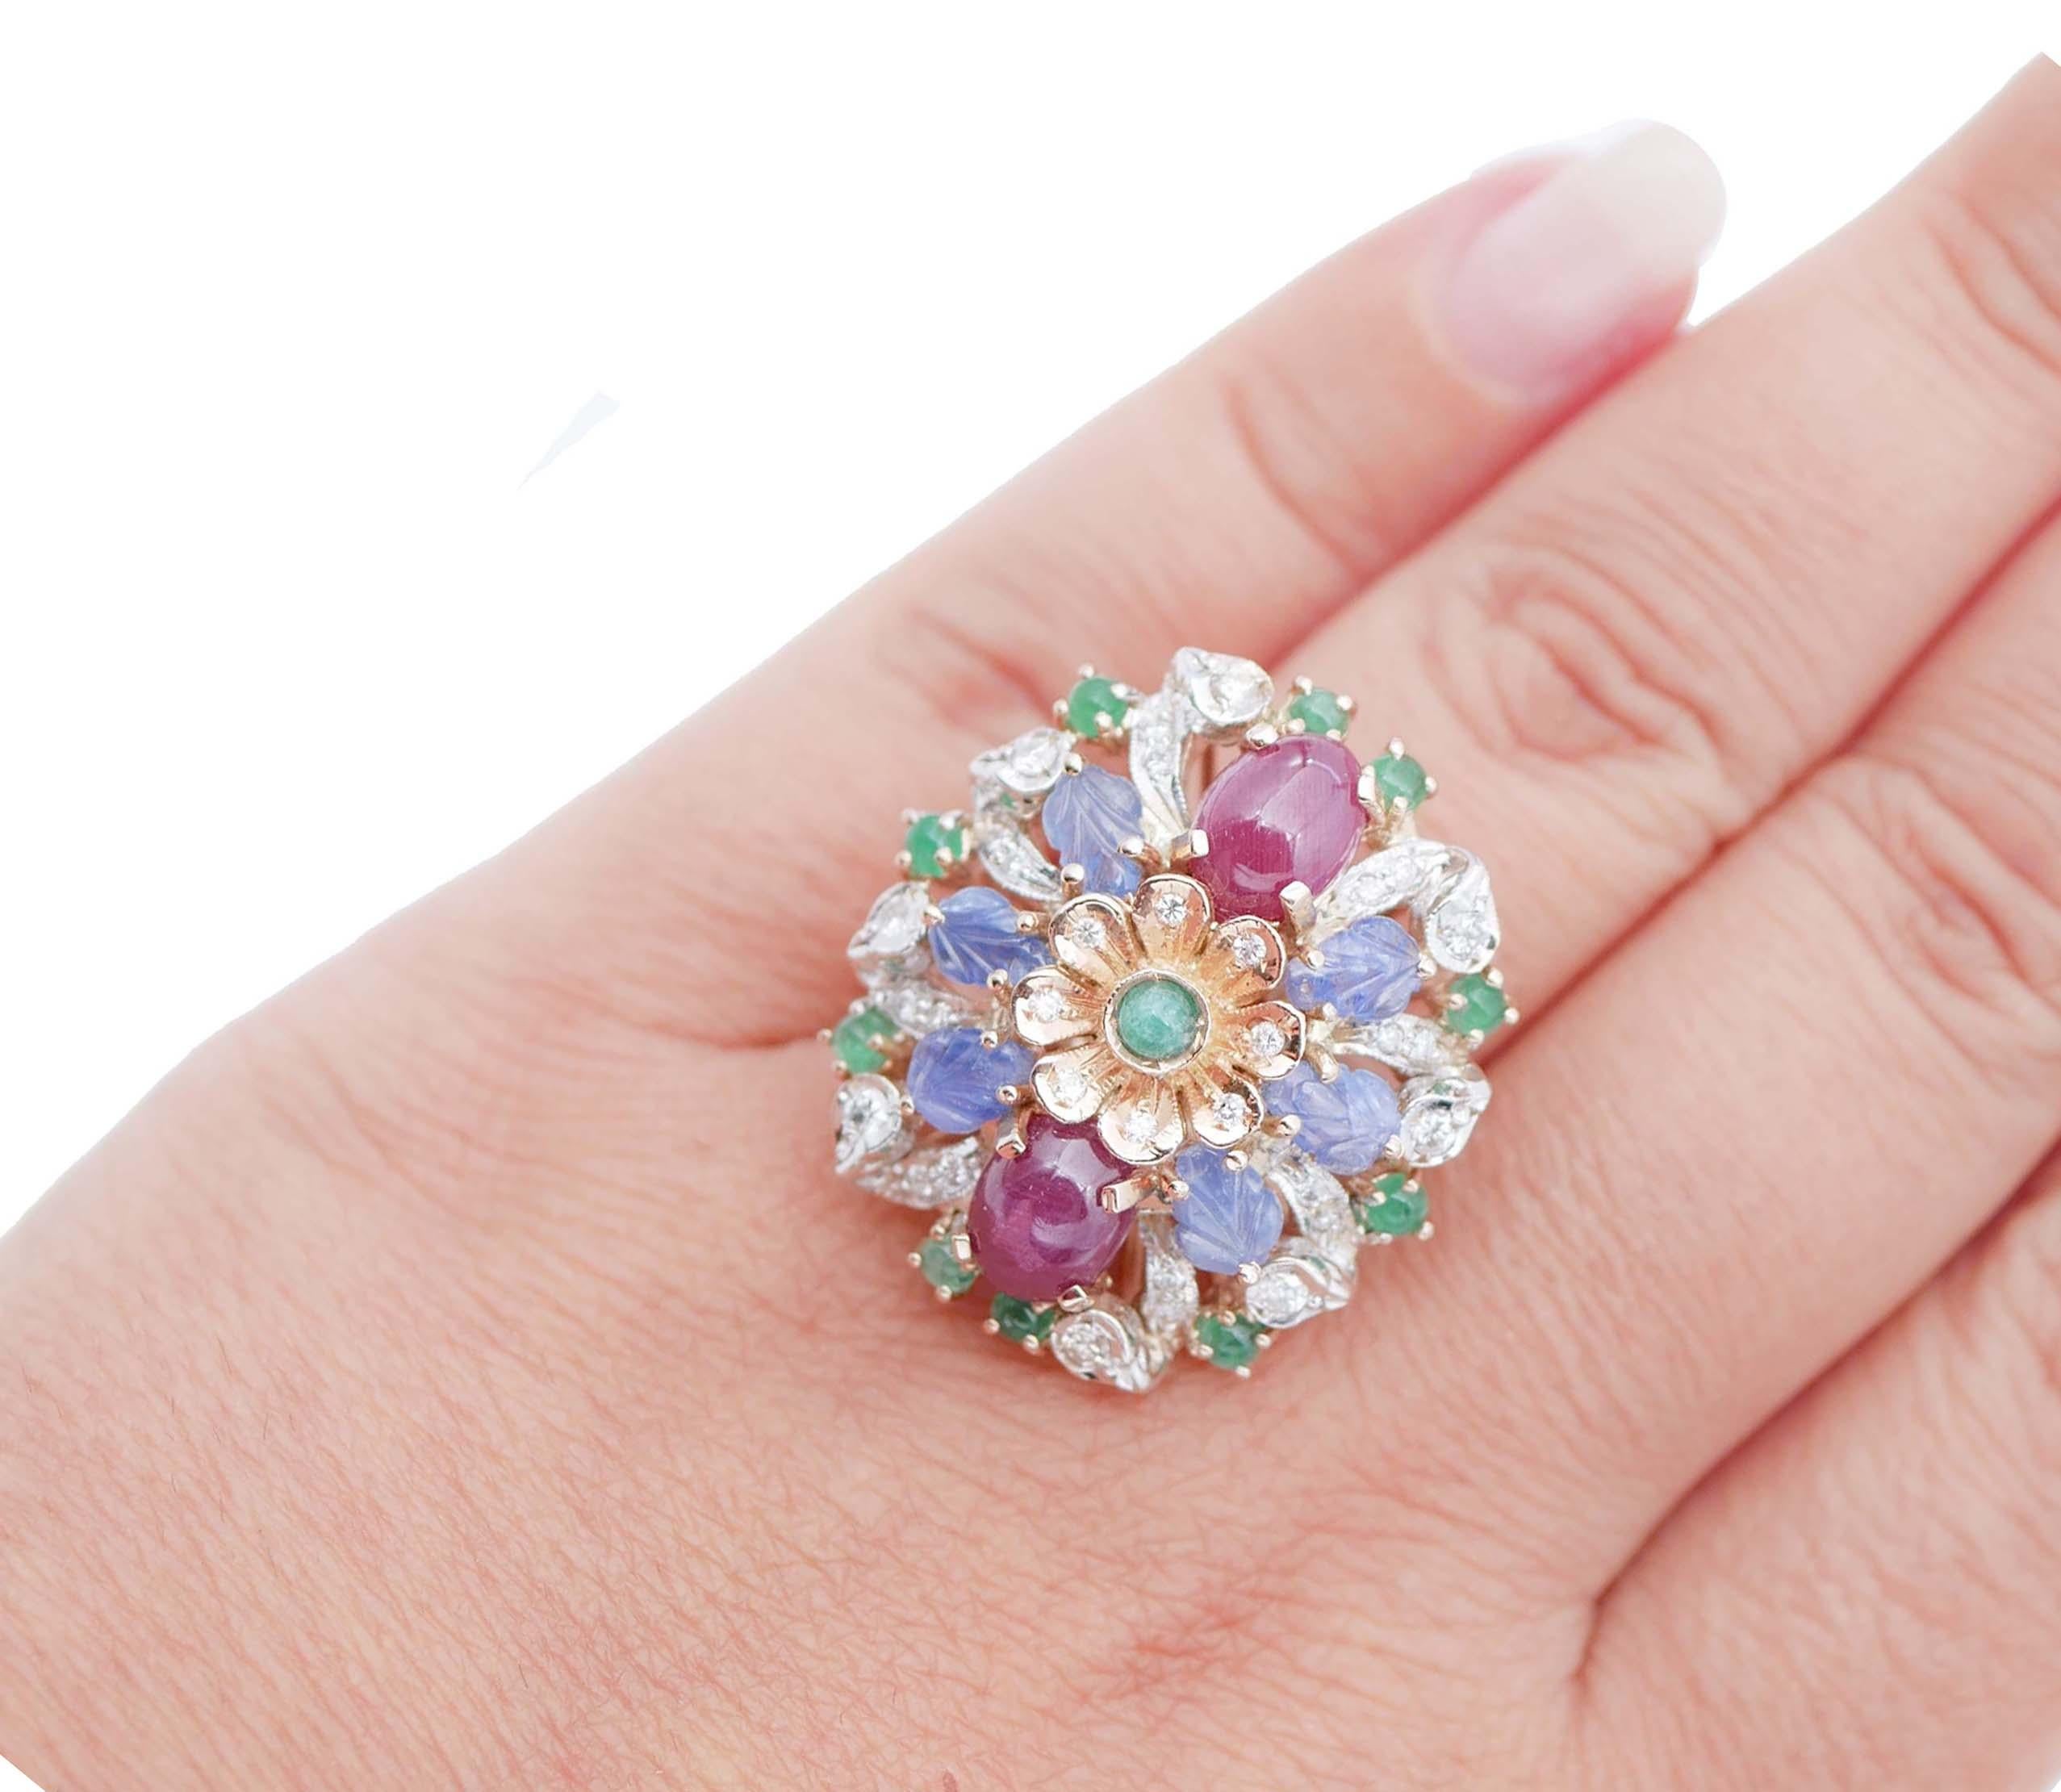 Mixed Cut Rubies, Sapphires, Emeralds, Diamonds, 14 Karat Rose and White Gold Ring For Sale